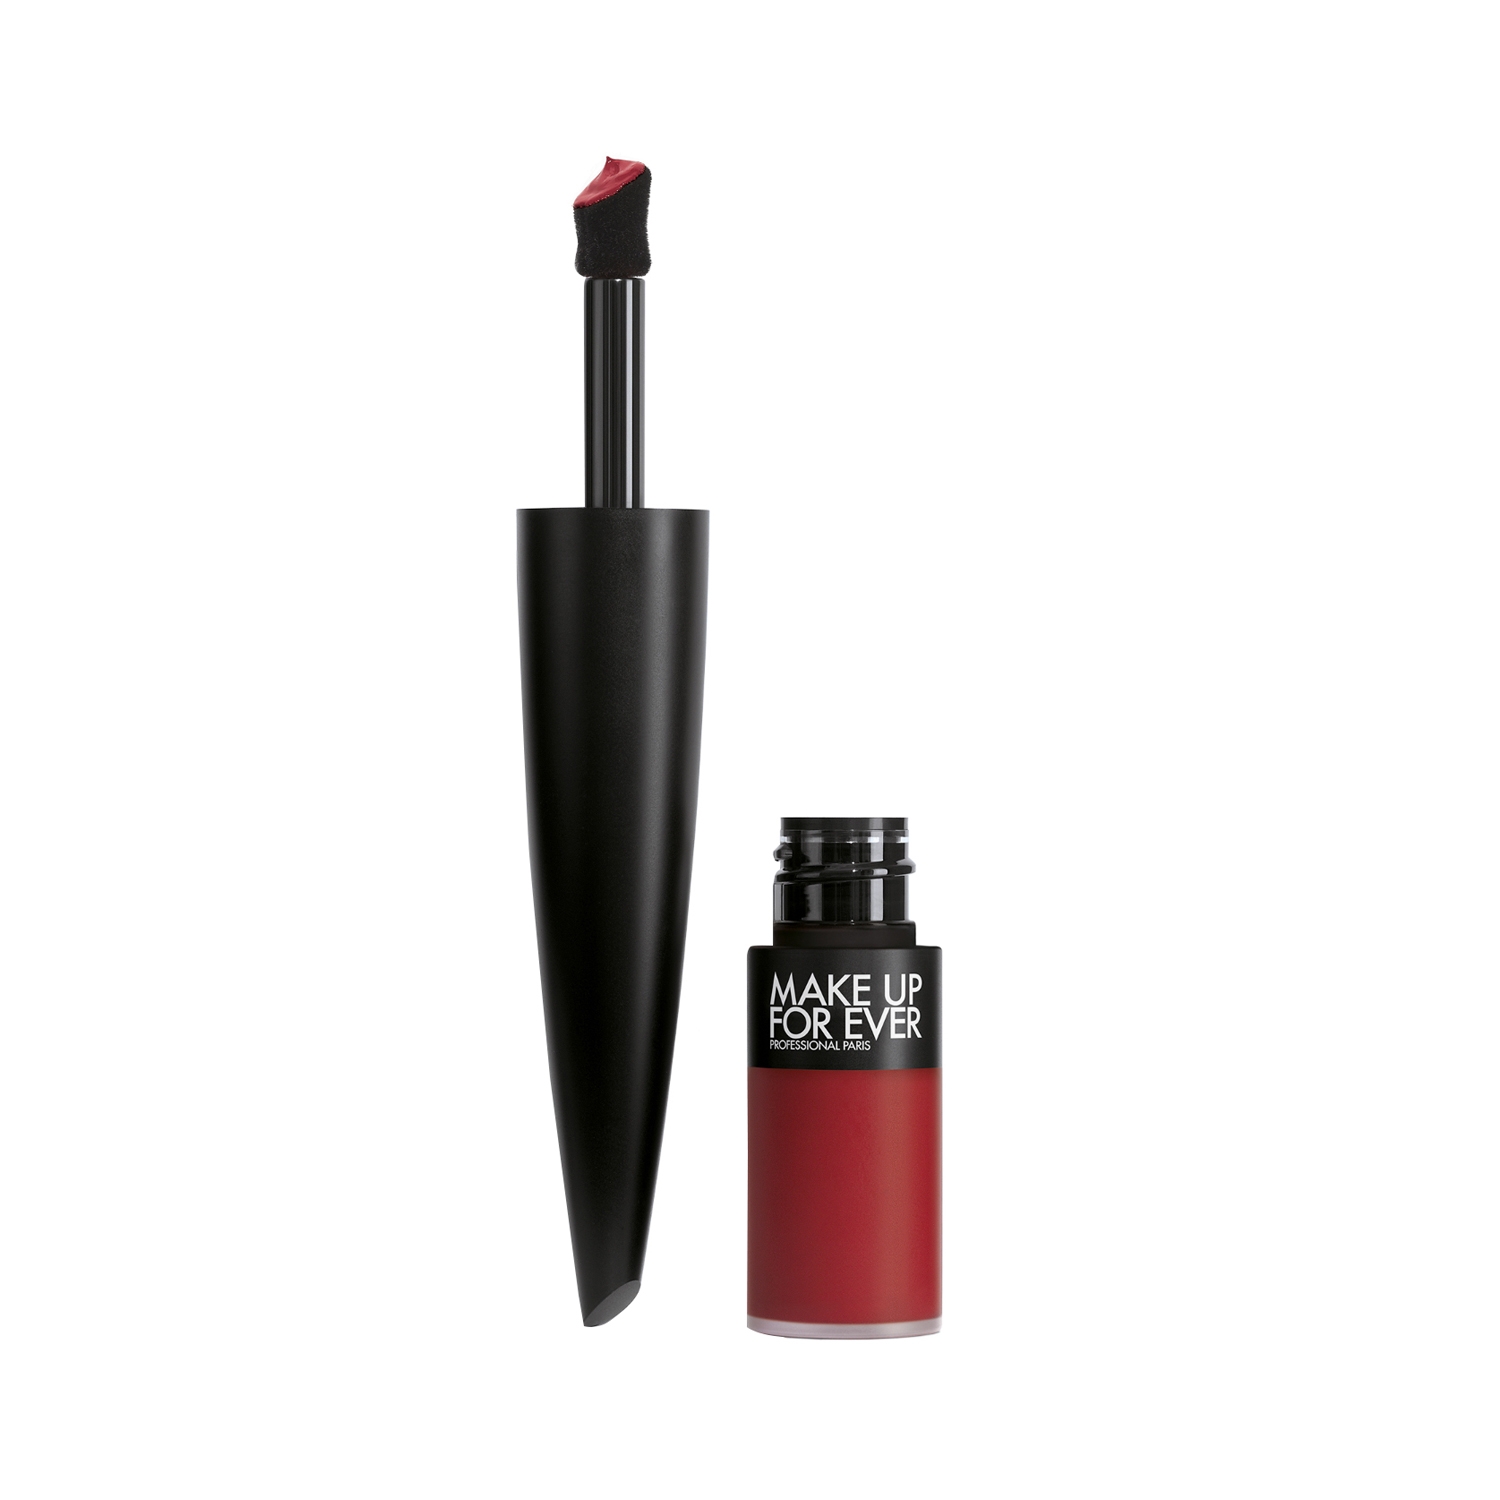 Make Up For Ever | Make Up For Ever Rouge Artist for Ever Matte Liquid Lipstick-crush Since Forever 340 (4.5ml)